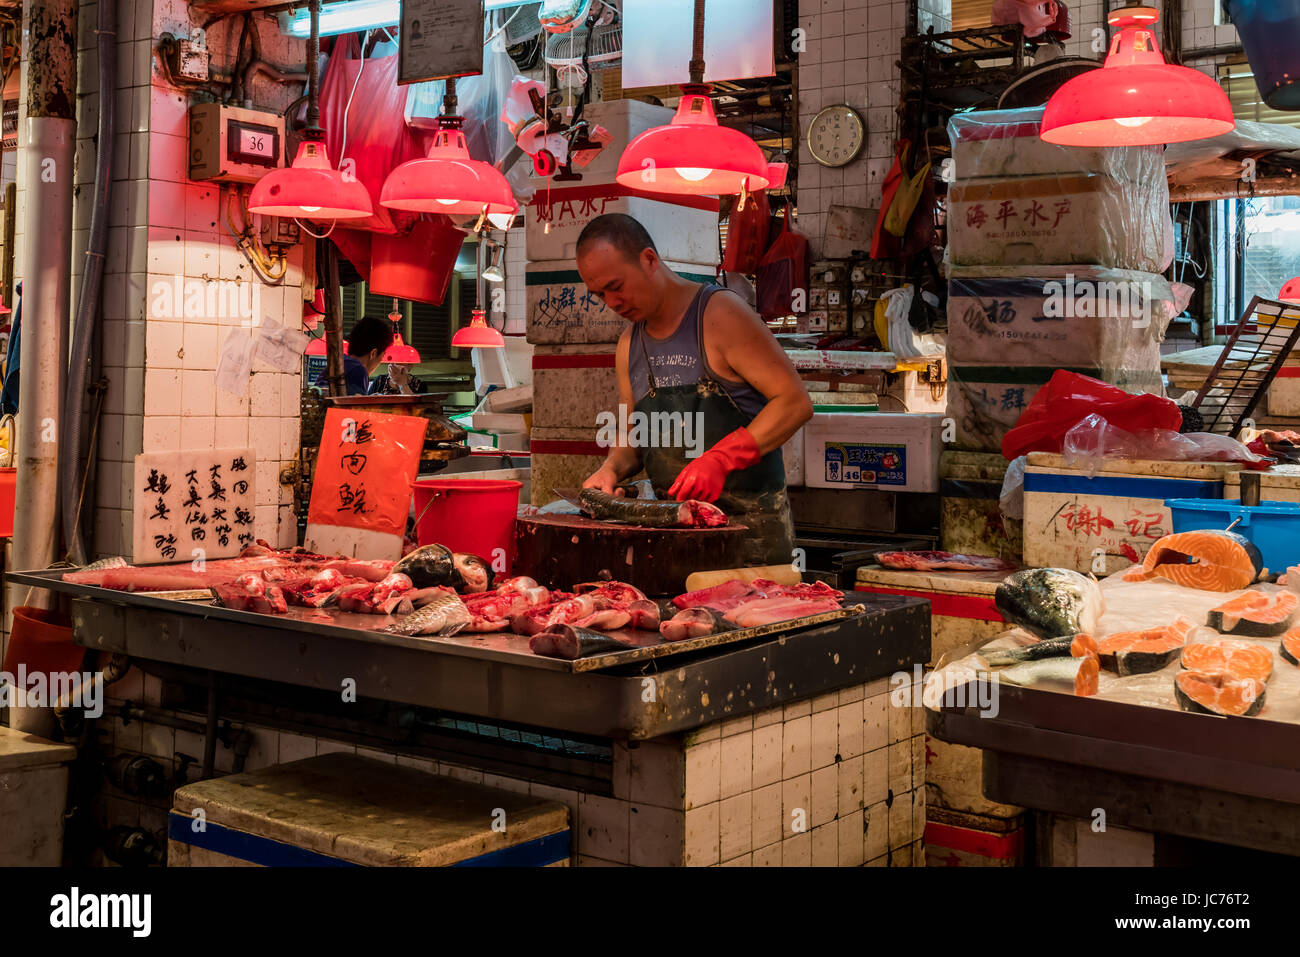 Colourful photo of a fishmonger filleting a fish on a round cutting board in his cramped stall in a wet market in Macau. Stock Photo